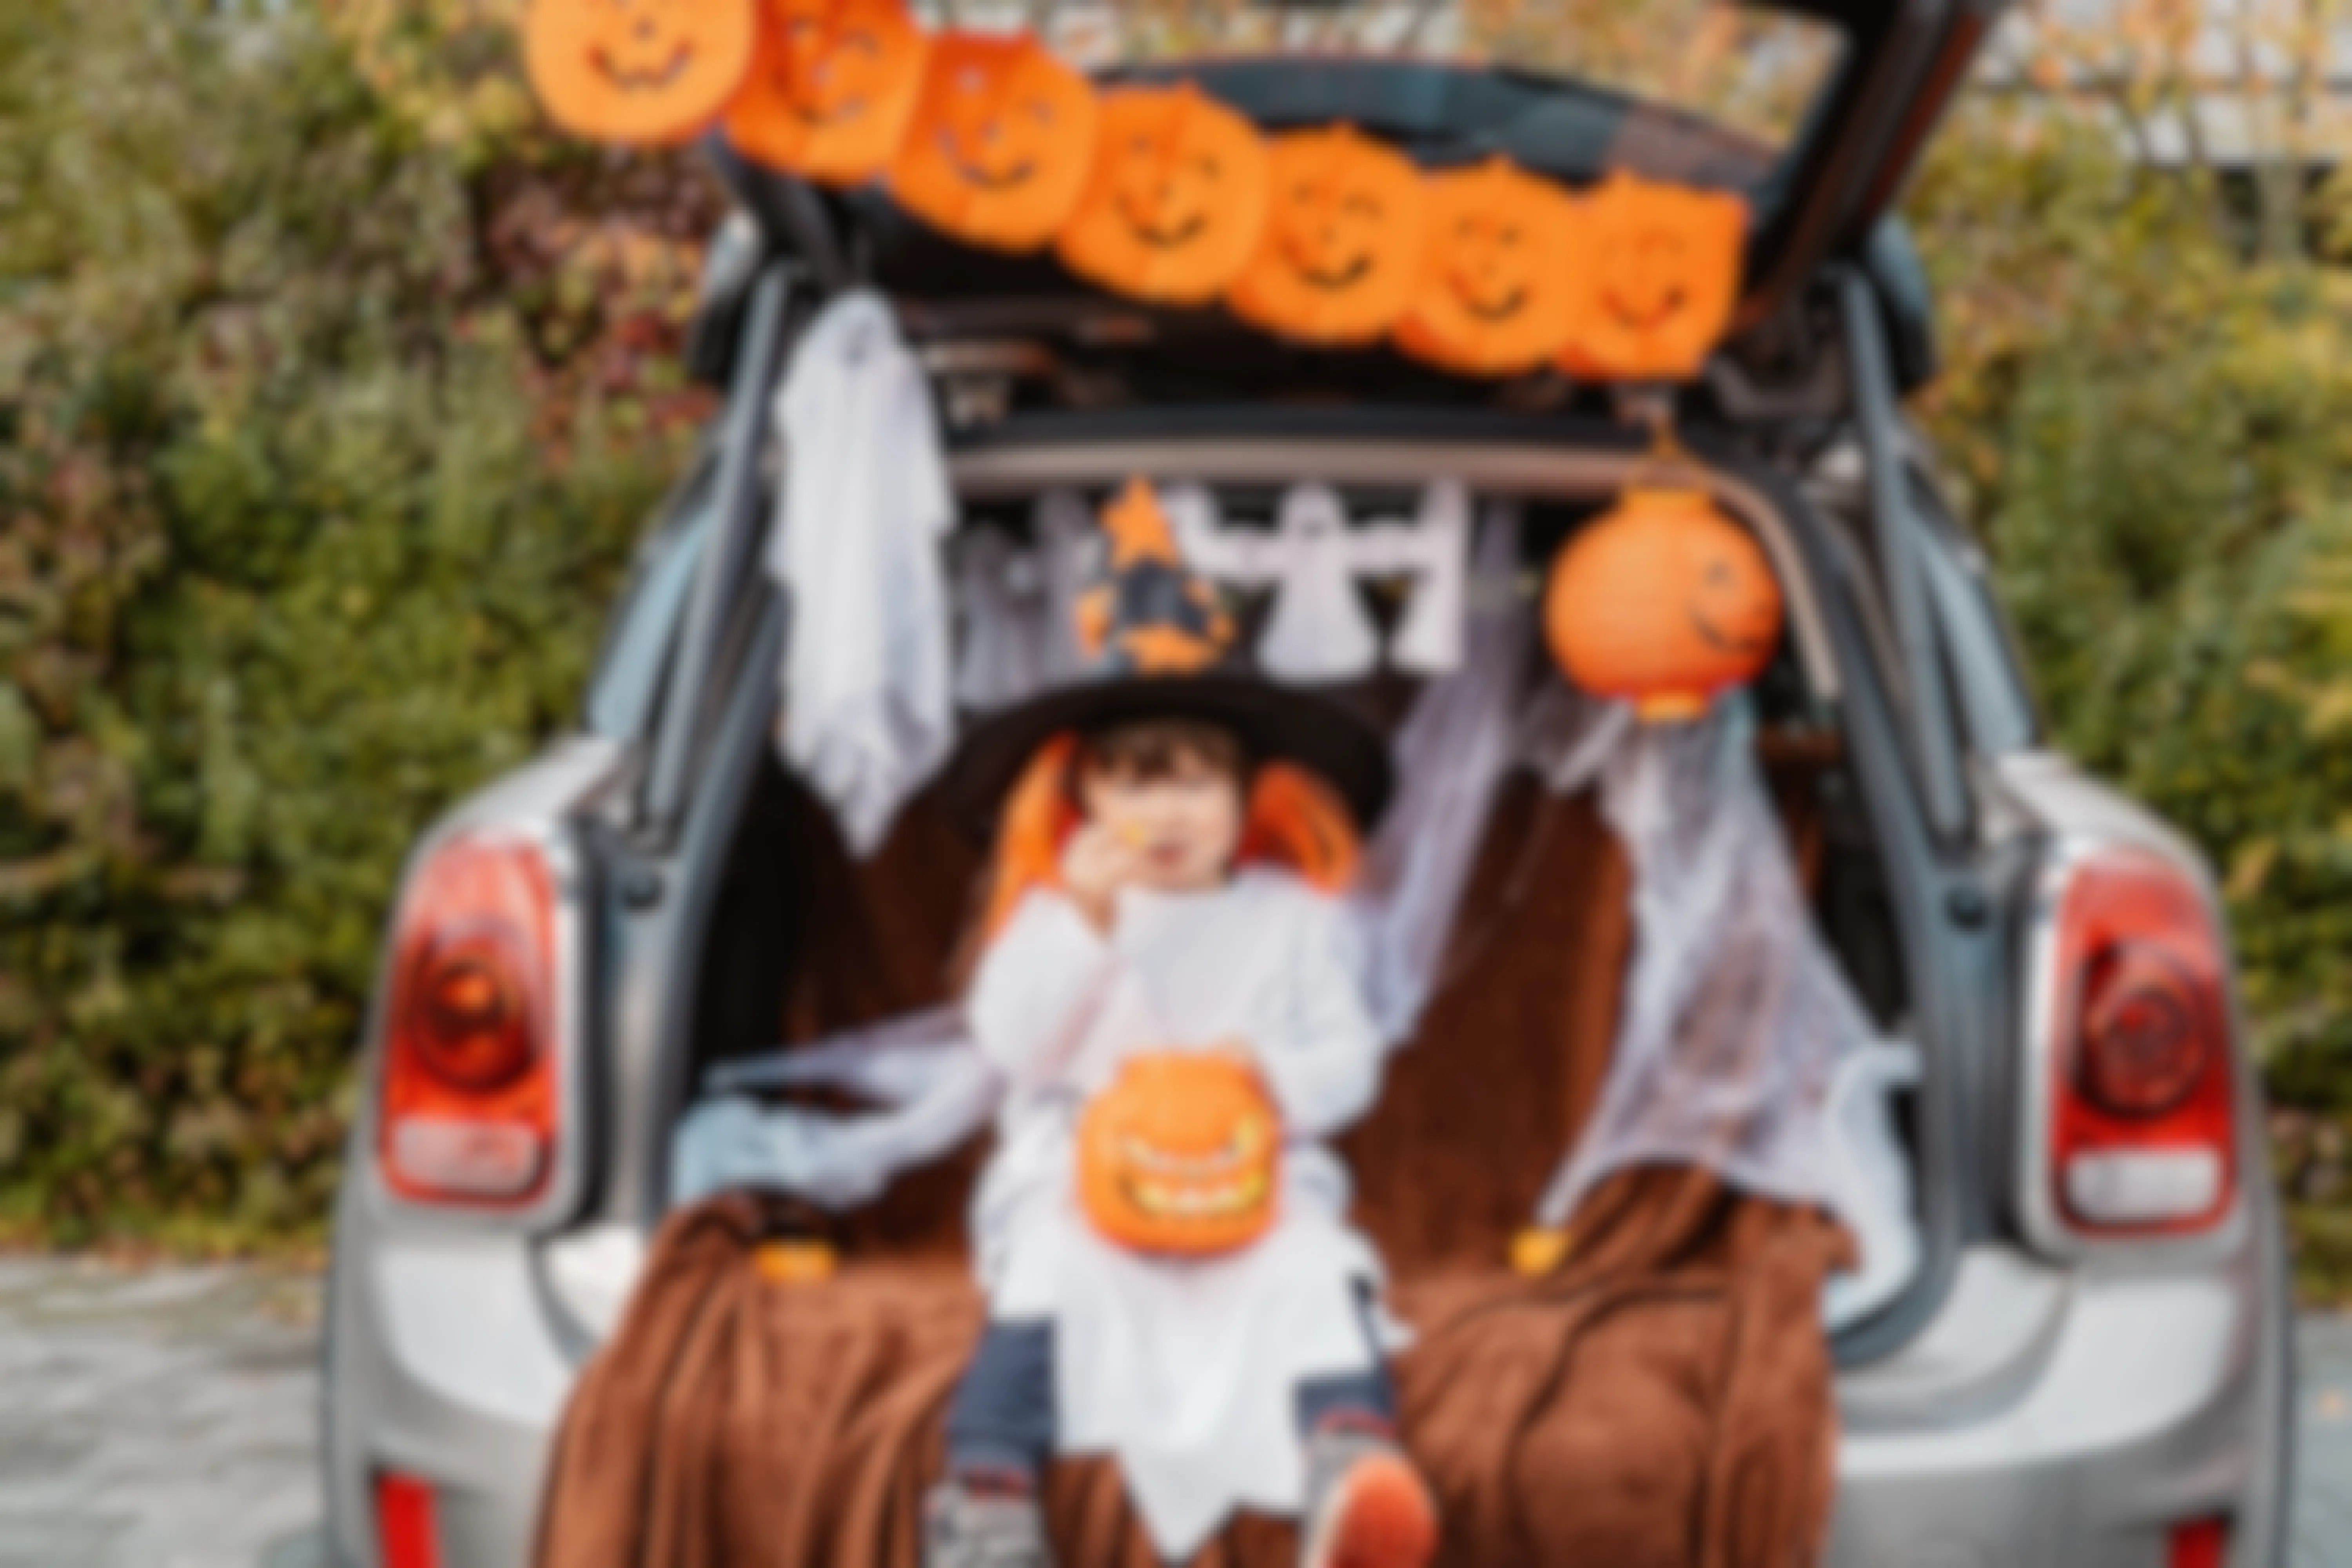 A child dressed in a halloween costume, eating a piece of candy is sitting on in the open truck of a car. The car trunk is decorated with pumpkins and ghosts.